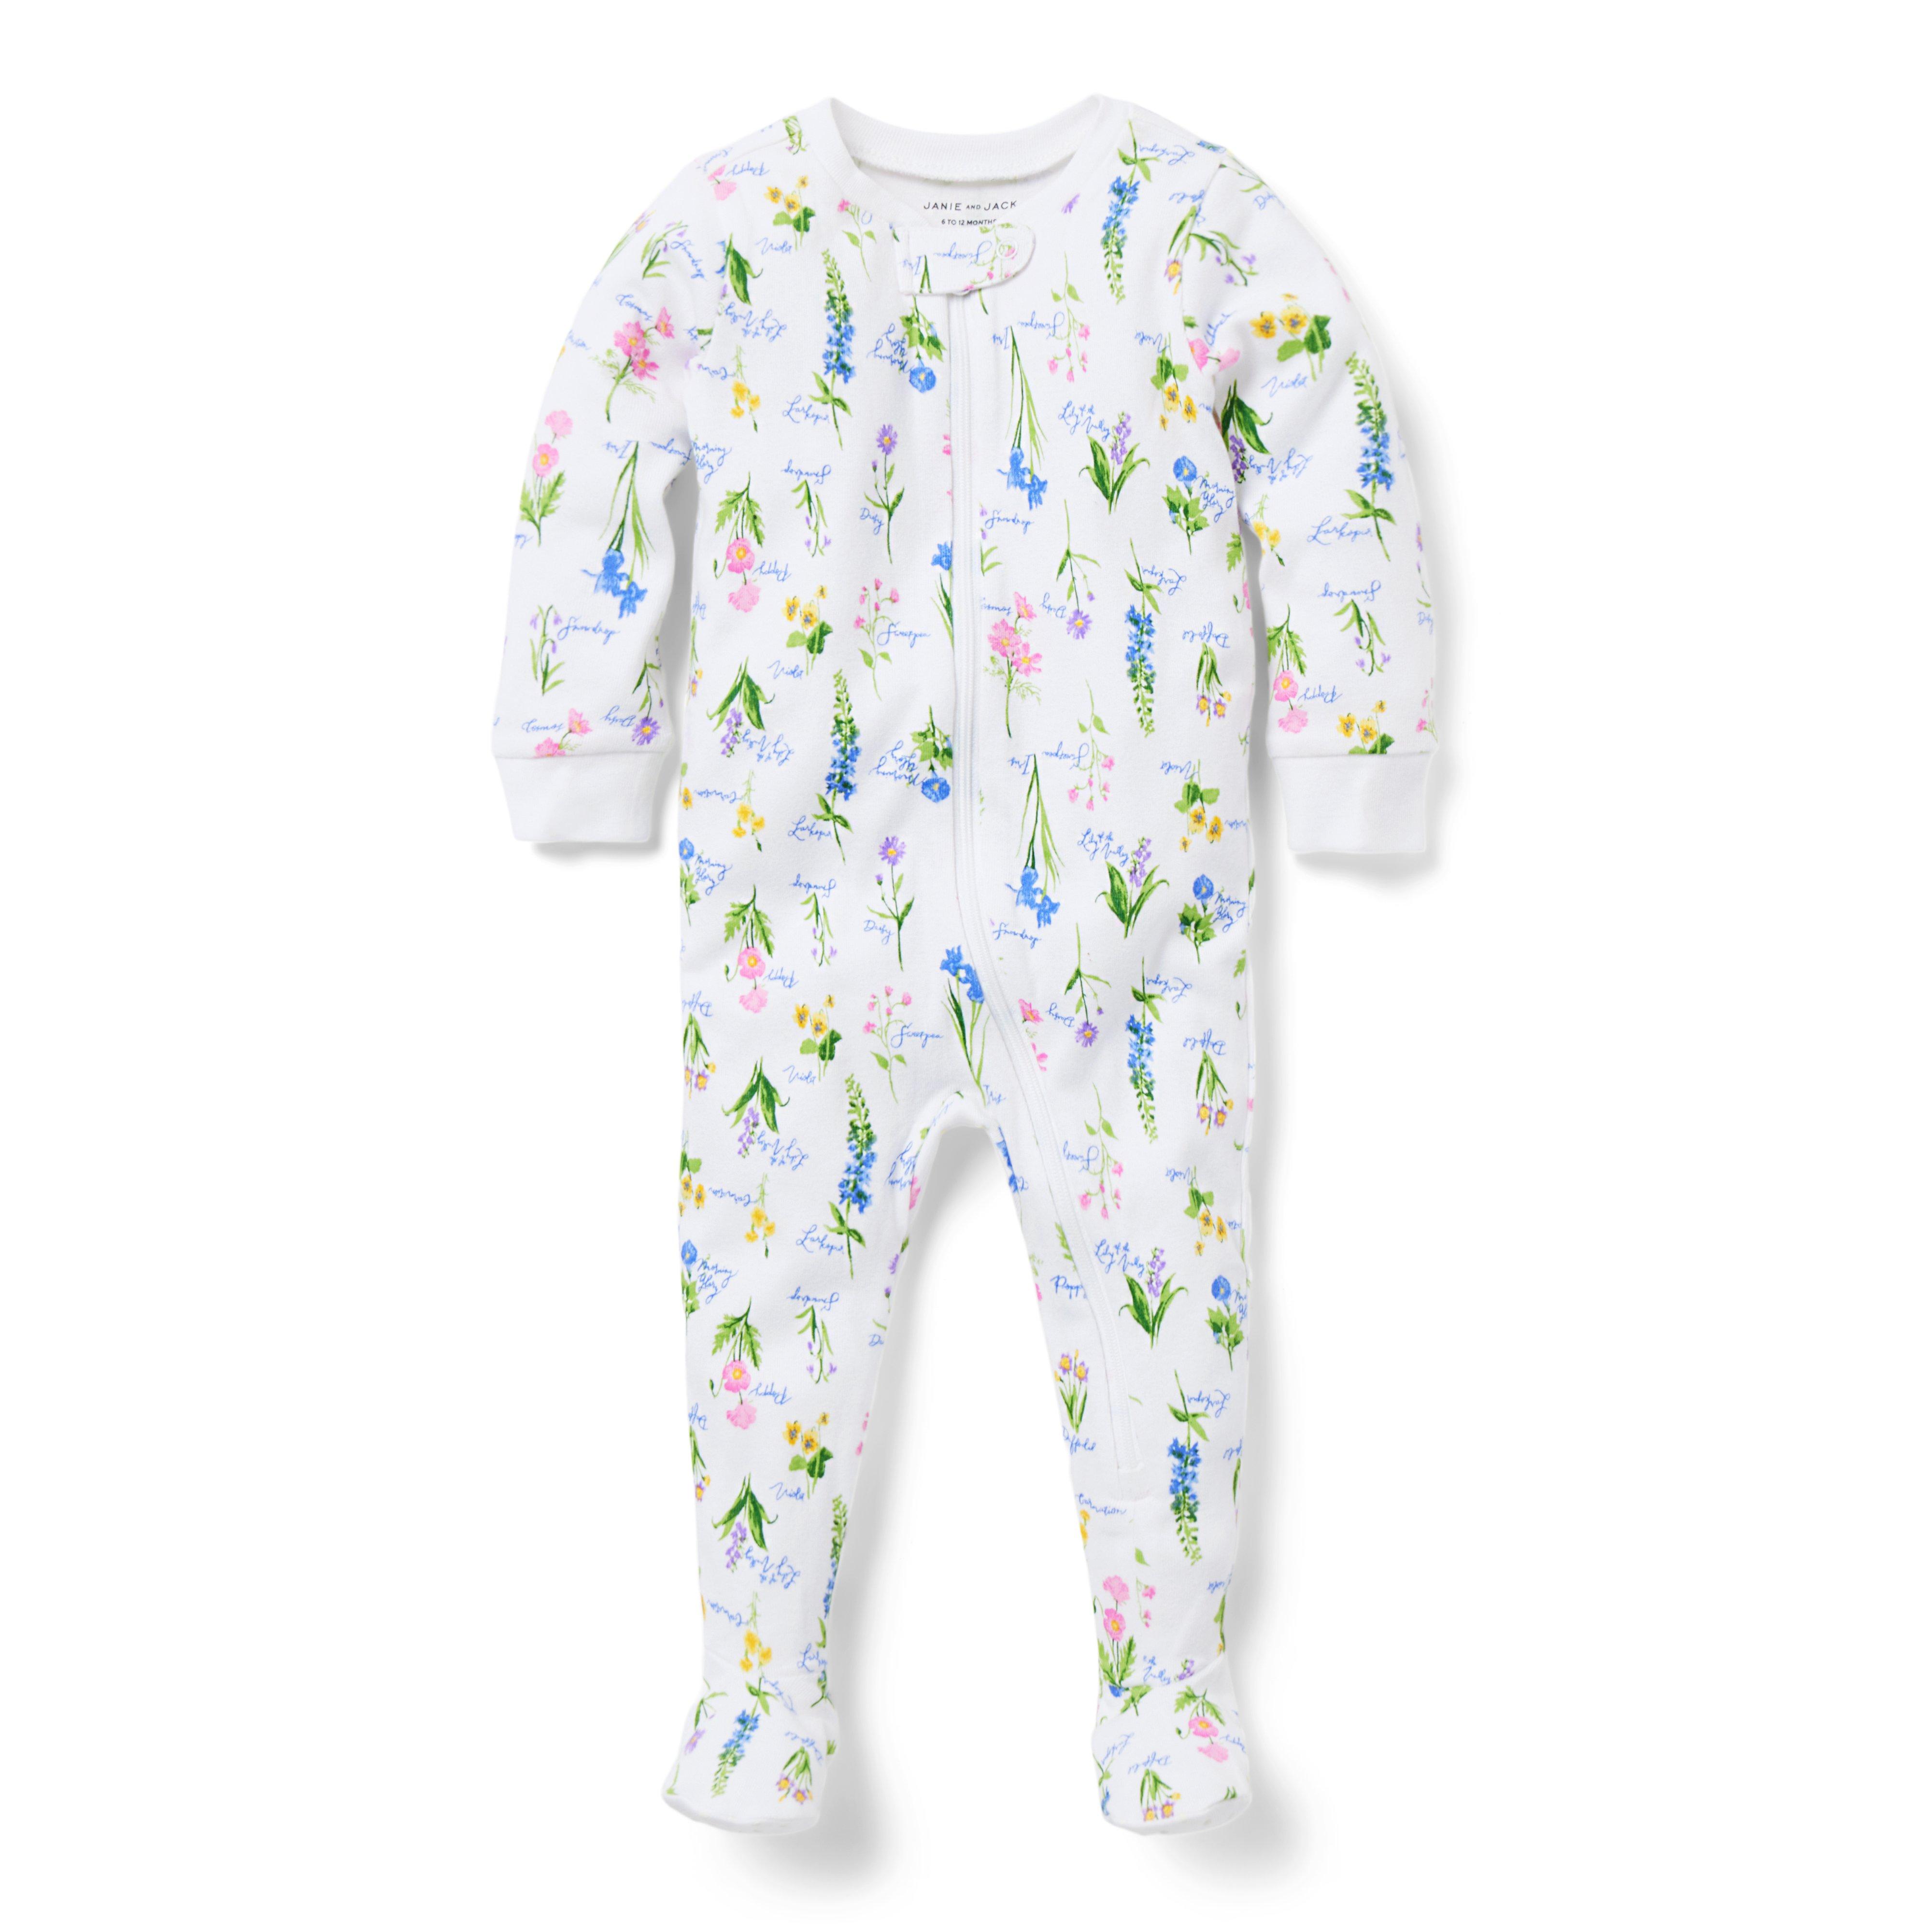 Baby Good Night Footed Pajamas in Floral Dreams  image number 0